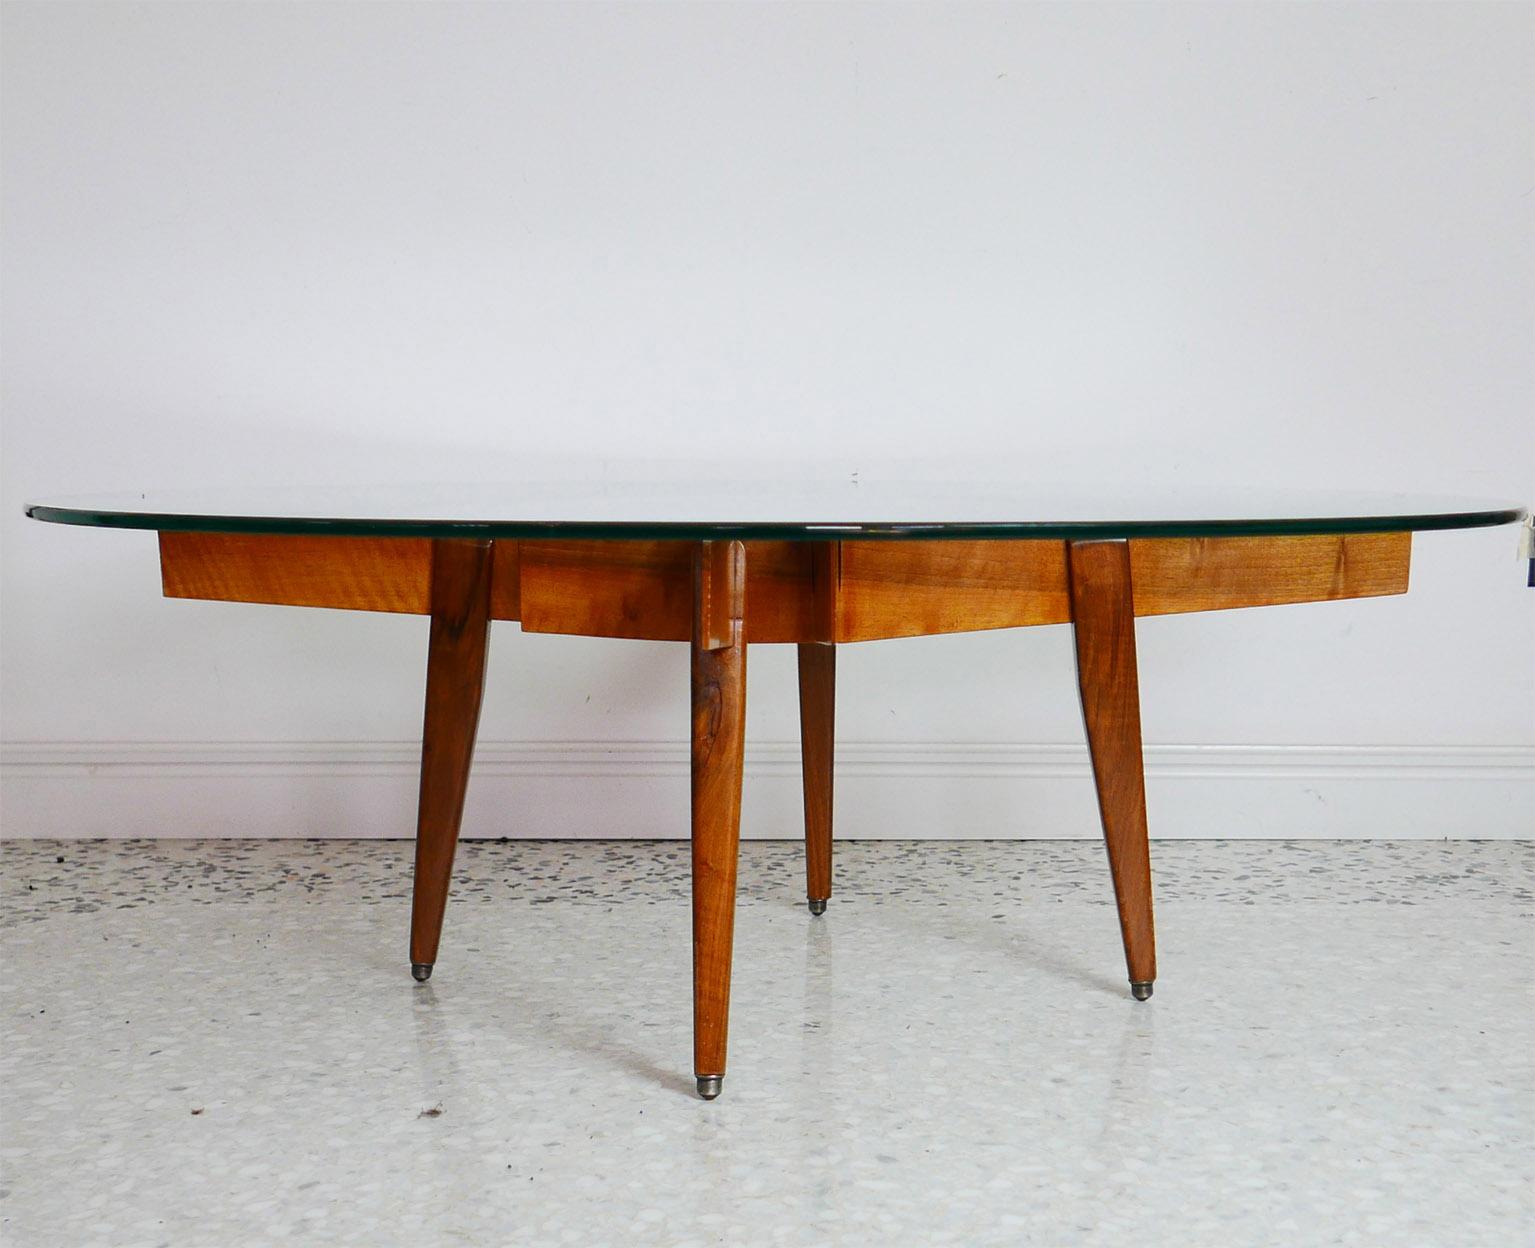 Italian Gio Ponti Low Table Manufactured by Giordano Chiesa with expertise, Milano 1956 For Sale